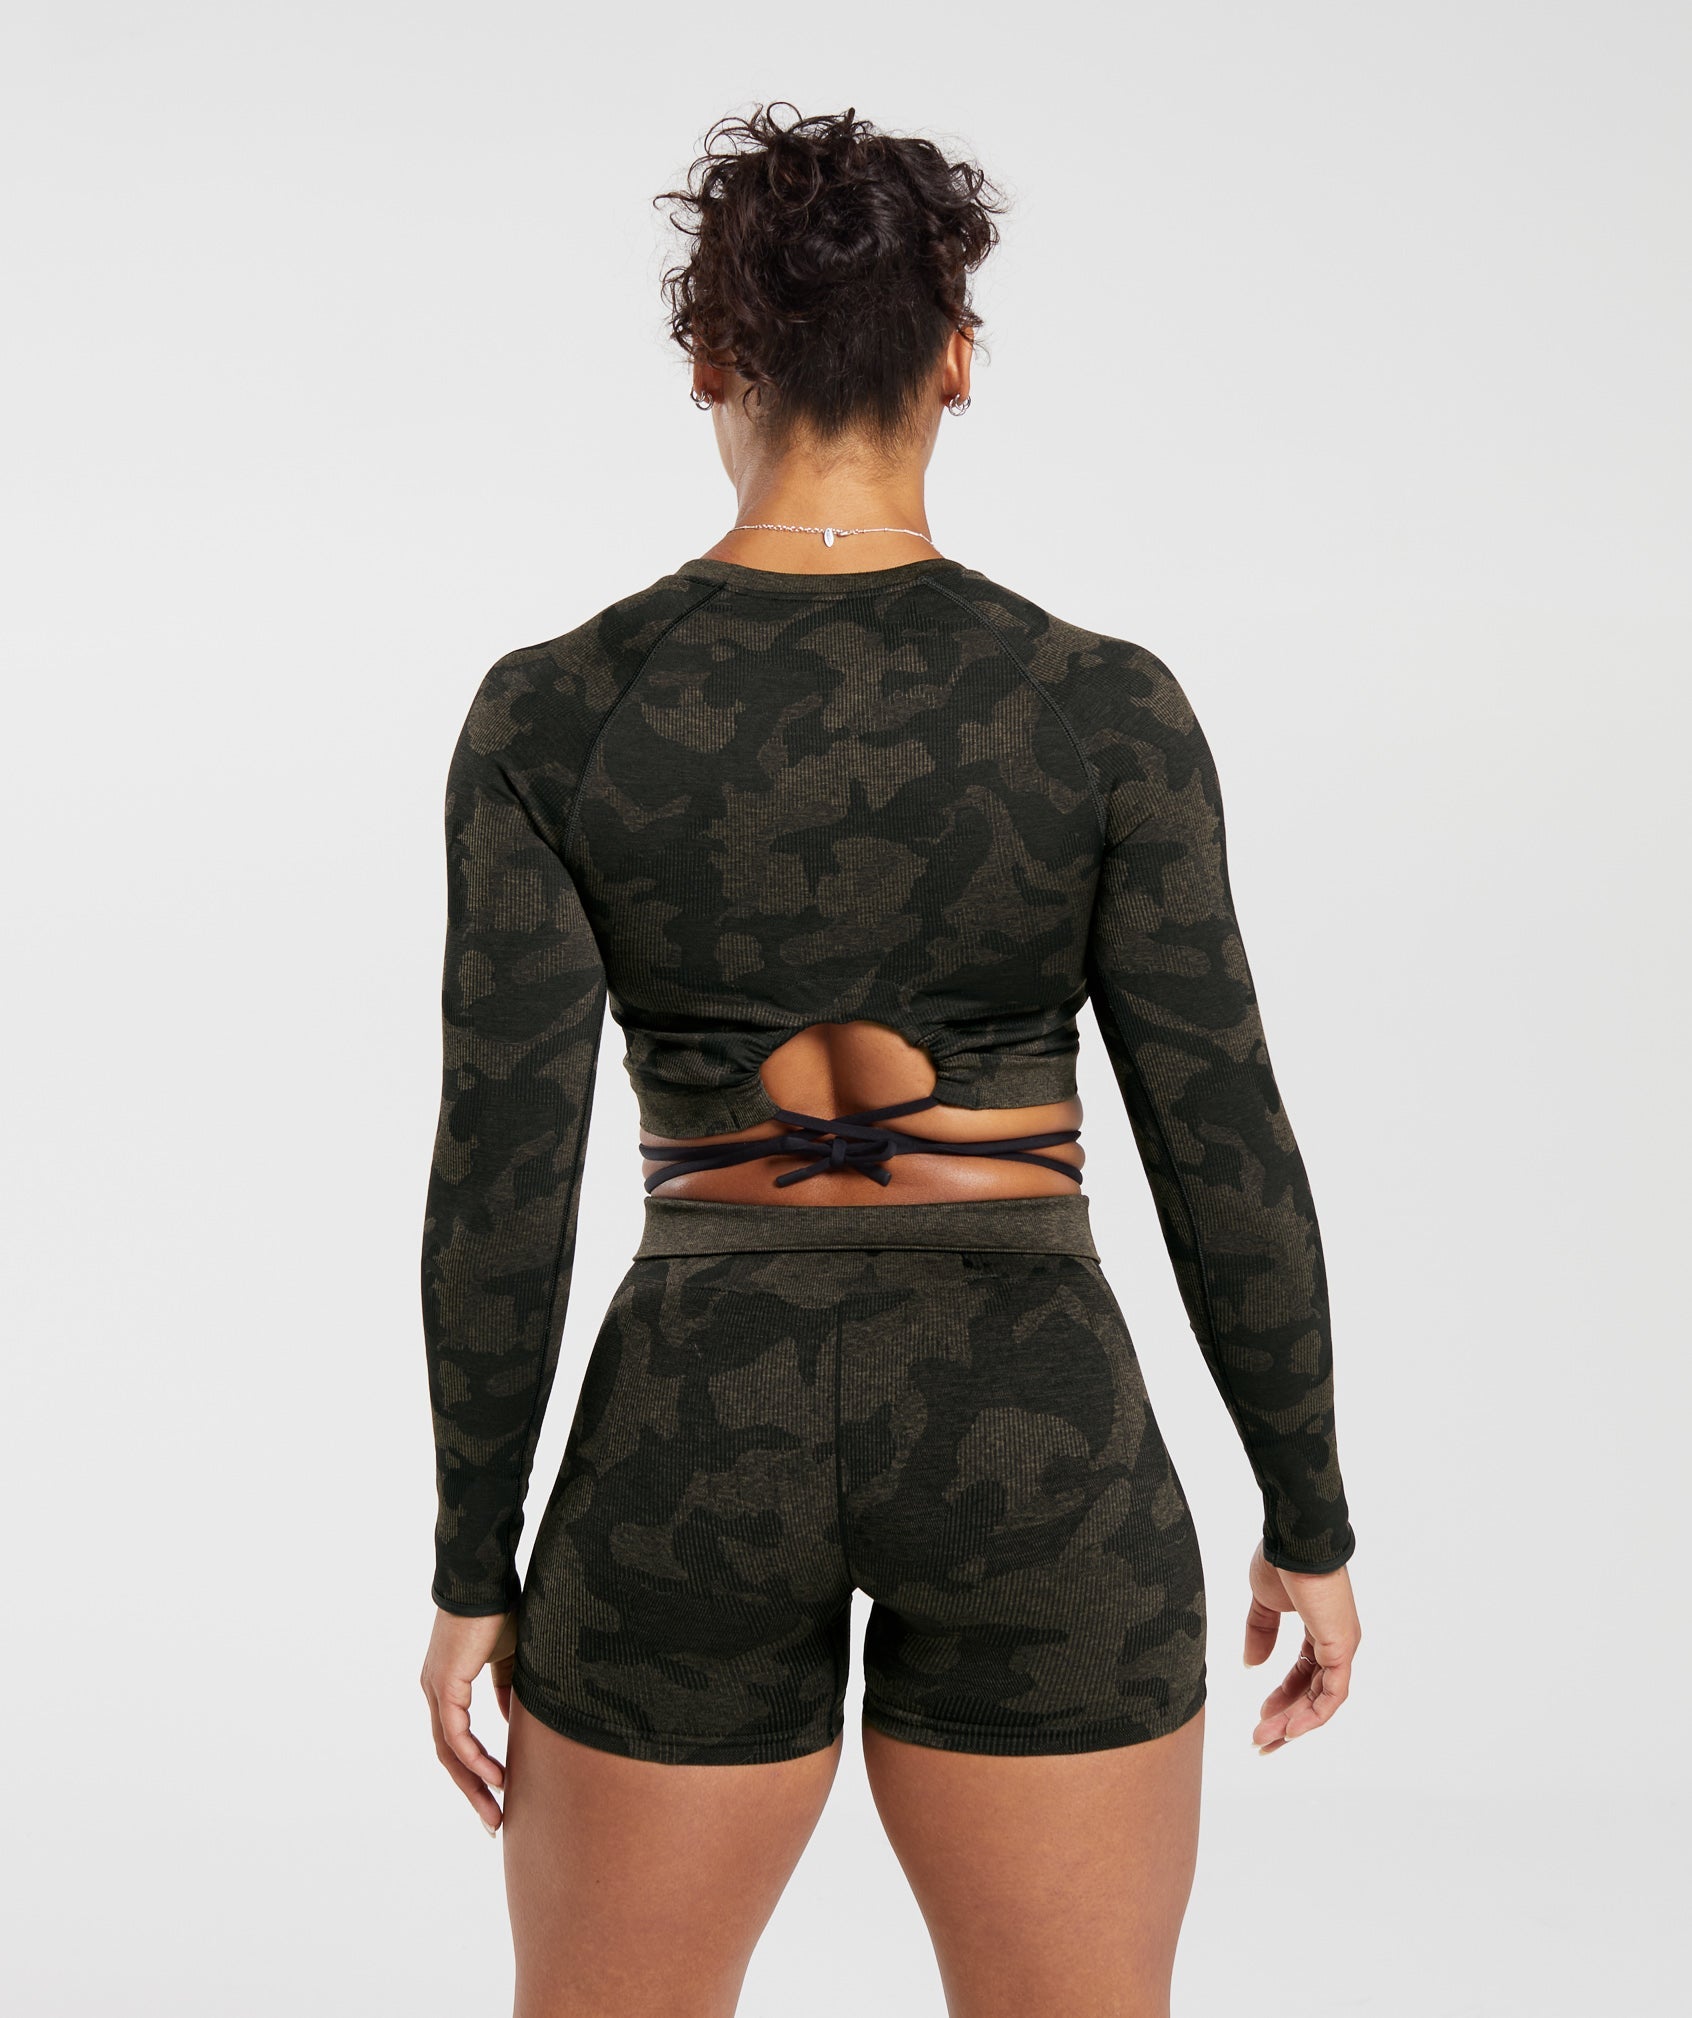 Gymshark Black Camo Seamless Leggings Size XS - $31 (48% Off Retail) - From  Spencer